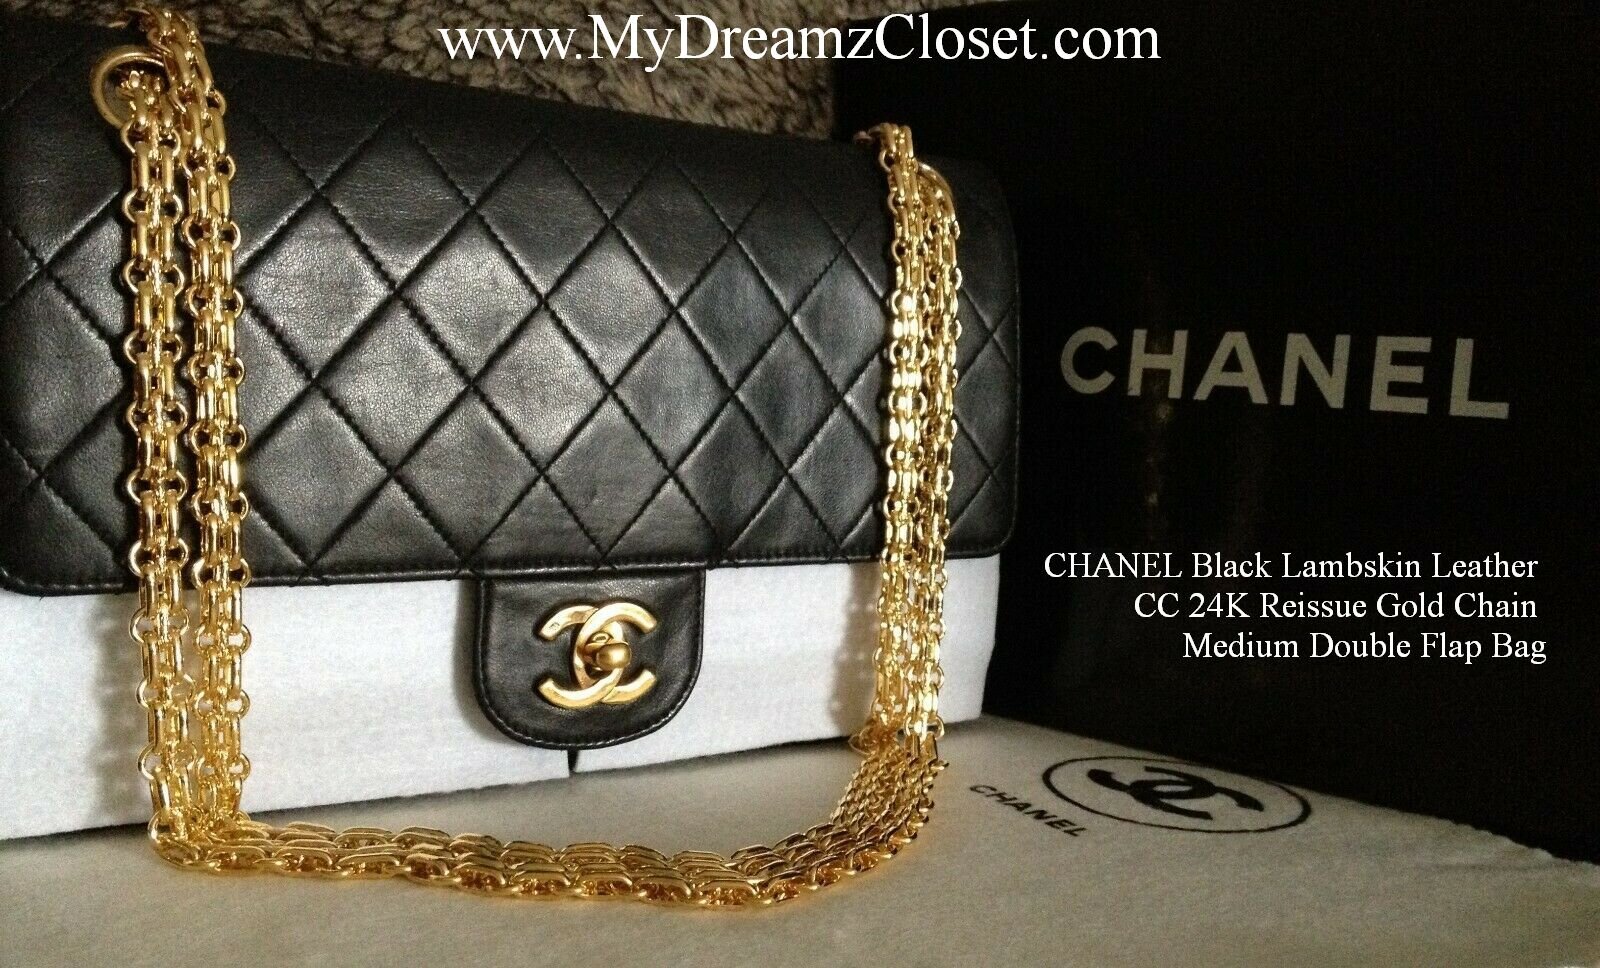 Chanel K28 Chanel 2.55 10.5 inch Double Flap Black Quilted Leather